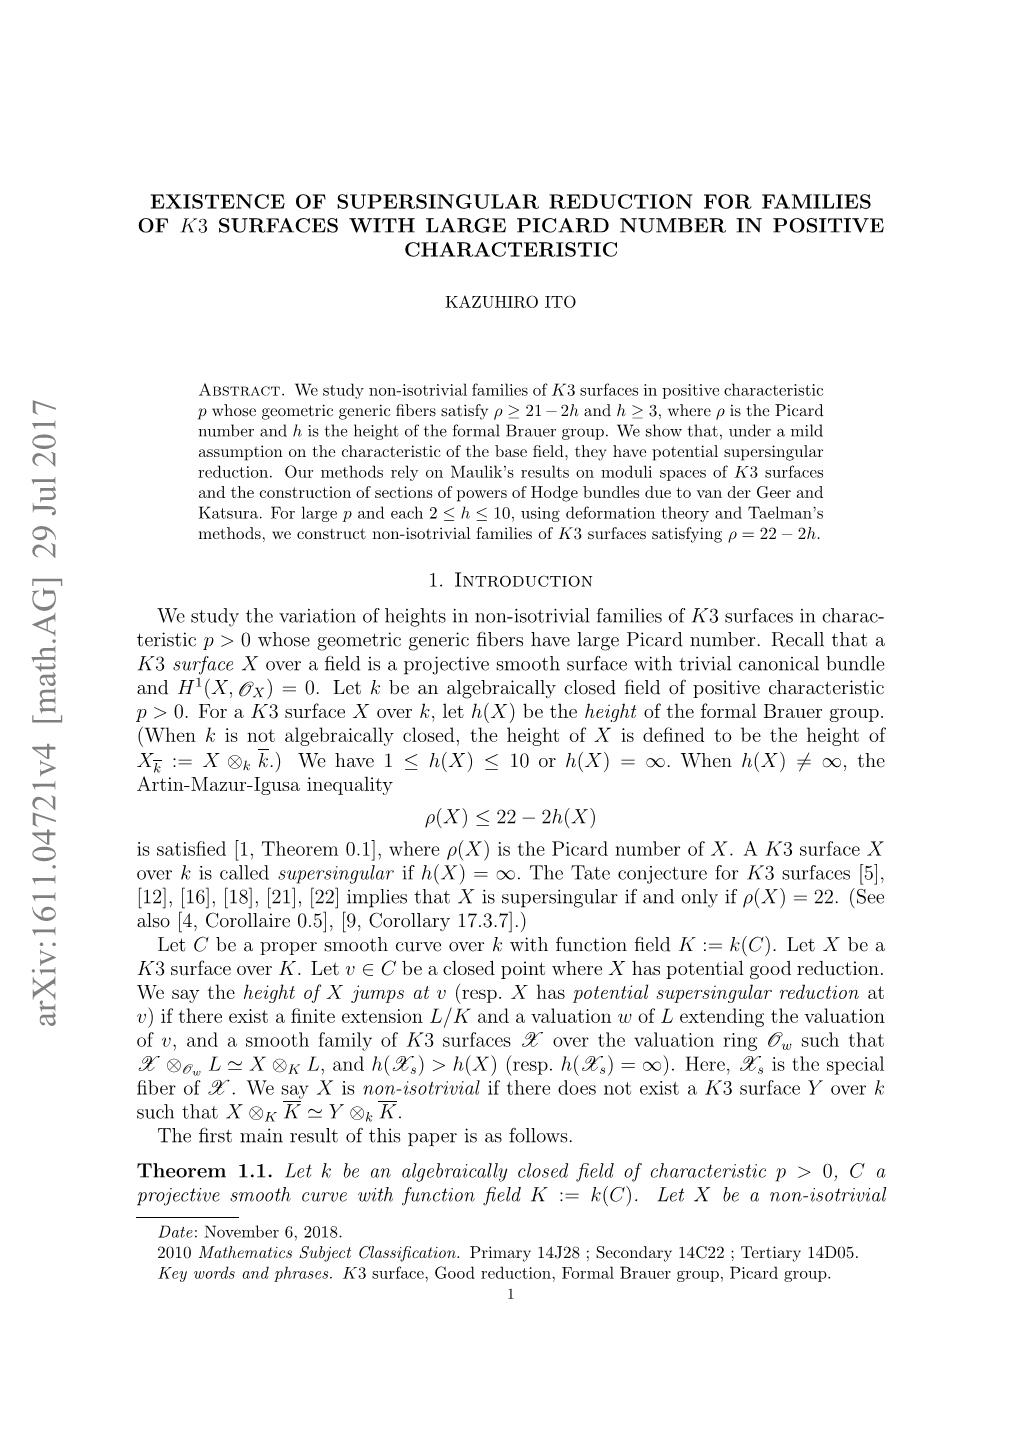 Existence of Supersingular Reduction for Families of K3 Surfaces with Large